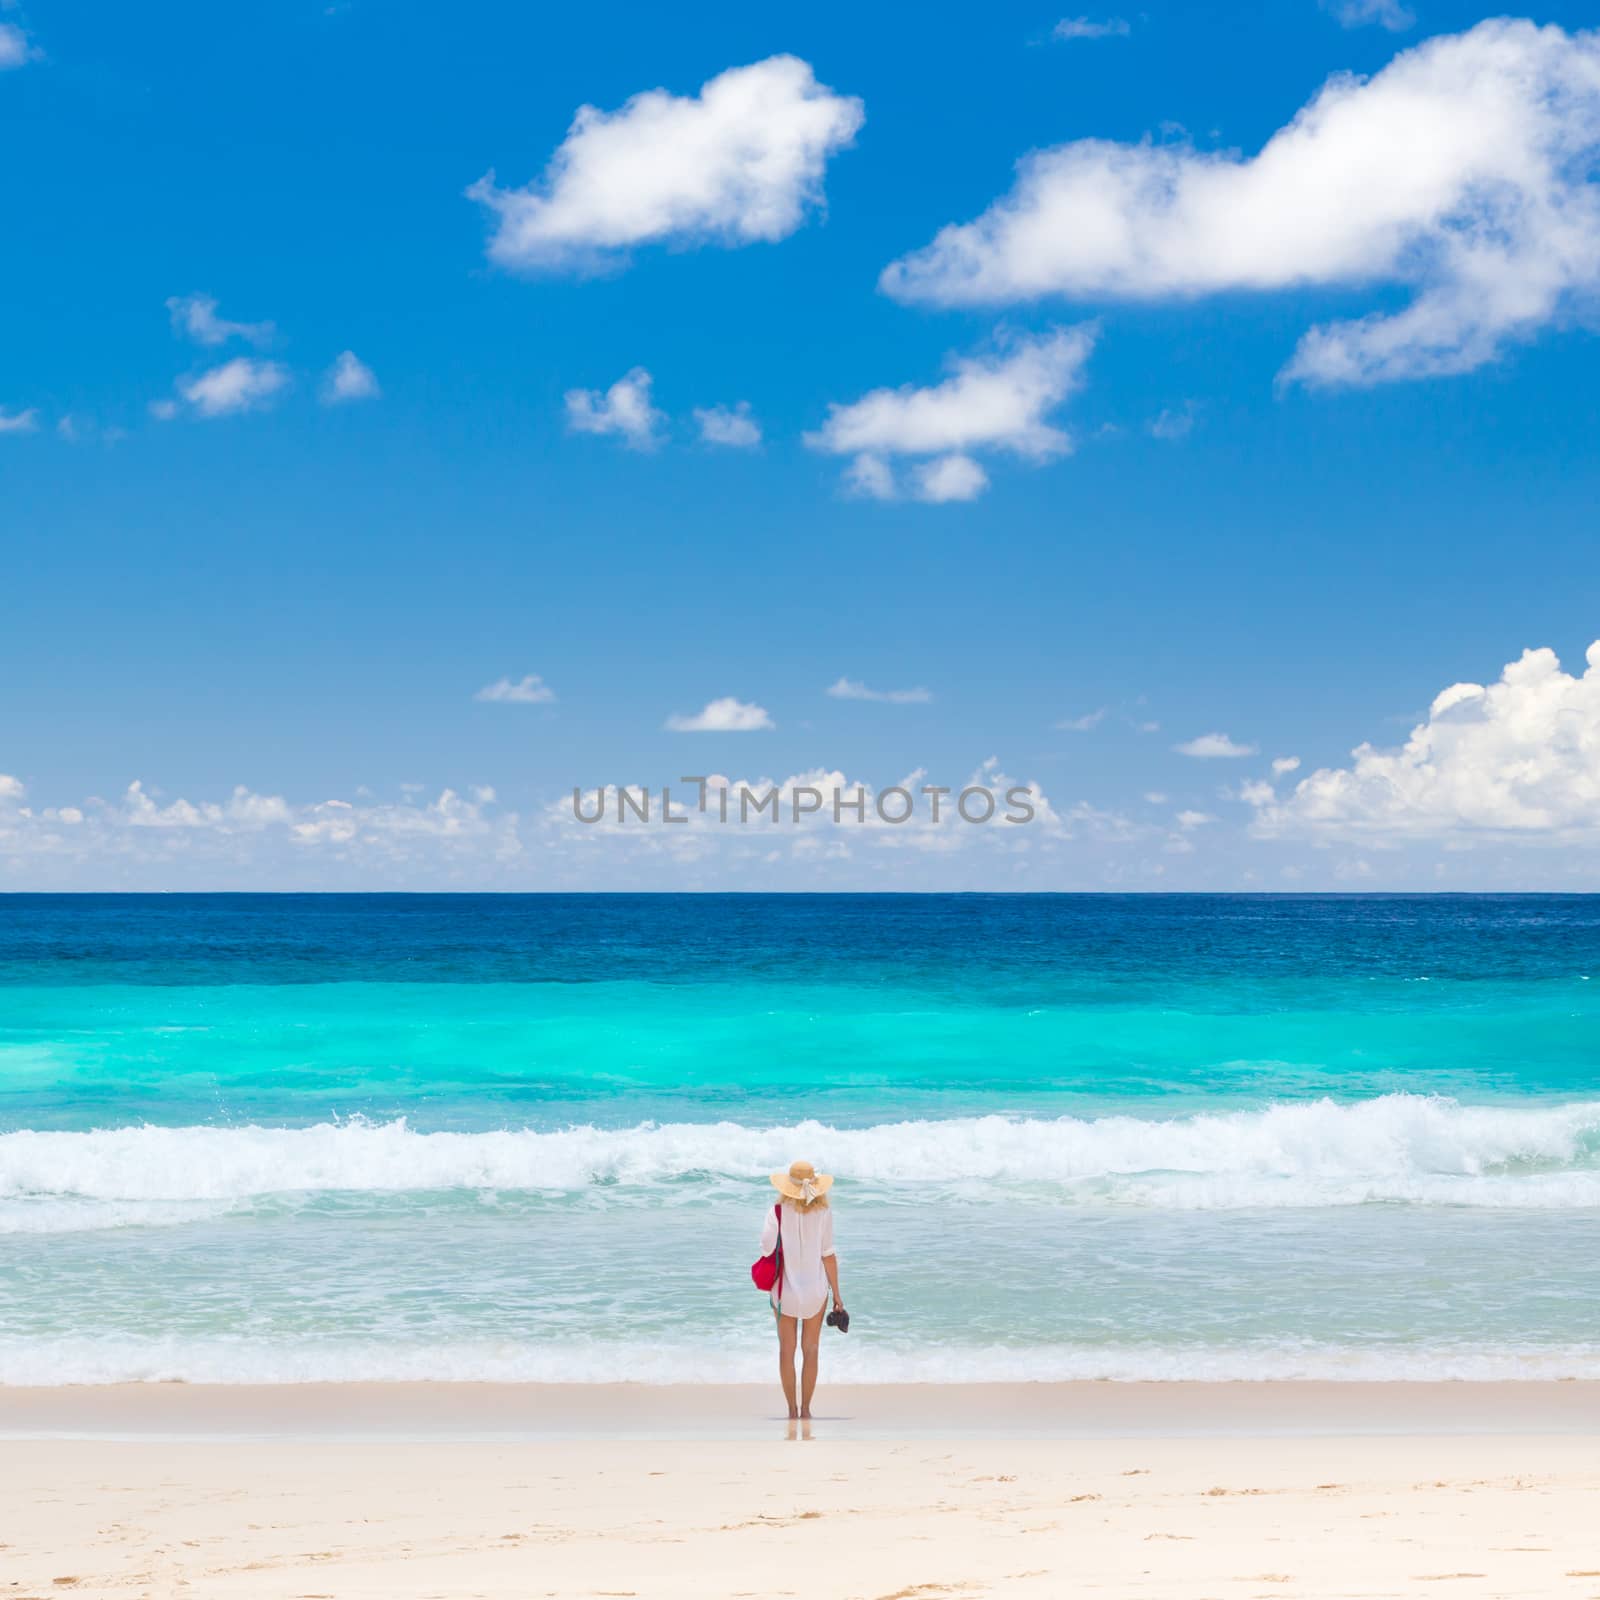 Woman enjoying picture perfect beach on Mahe Island, Seychelles. by kasto